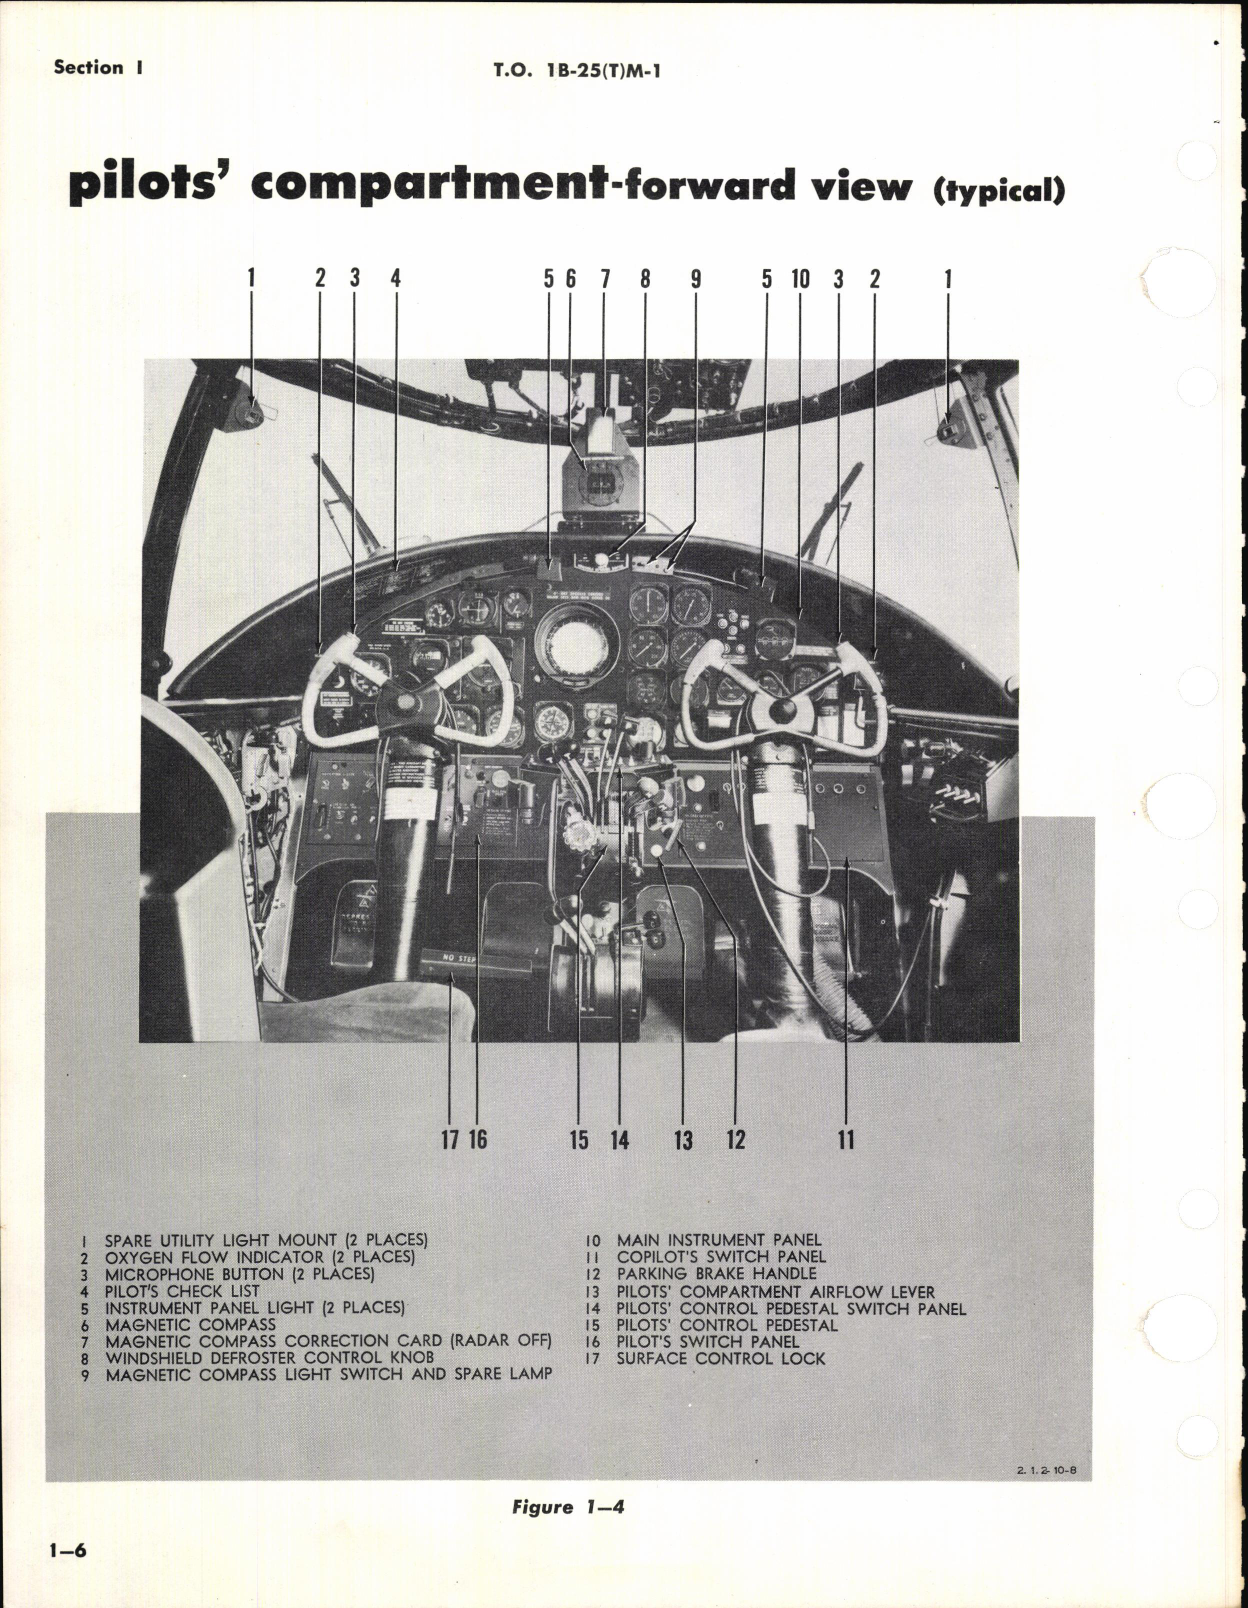 Sample page 12 from AirCorps Library document: Flight Handbook for USAF Series TB-25M Aircraft